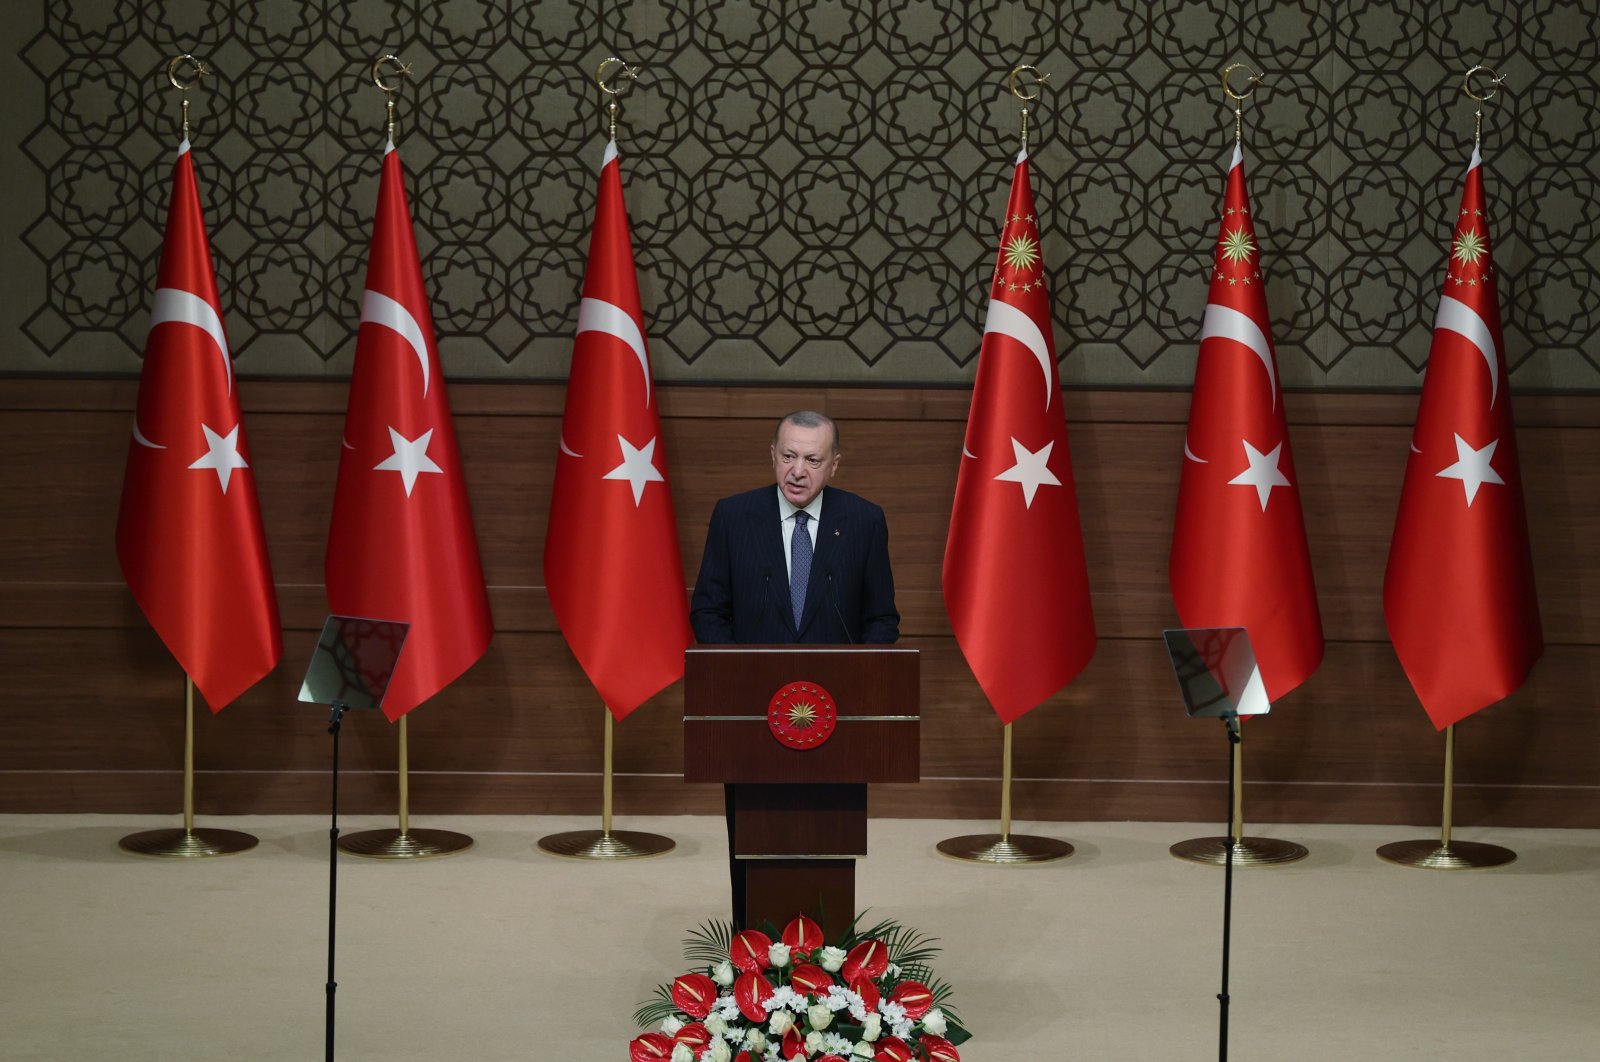 Turkish President Recep Tayyip Erdoğan speaks at a ceremony to inaugurate water projects in four Turkish provinces at the Presidential Complex, Ankara, Turkey, July 5, 2021. (IHA Photo)